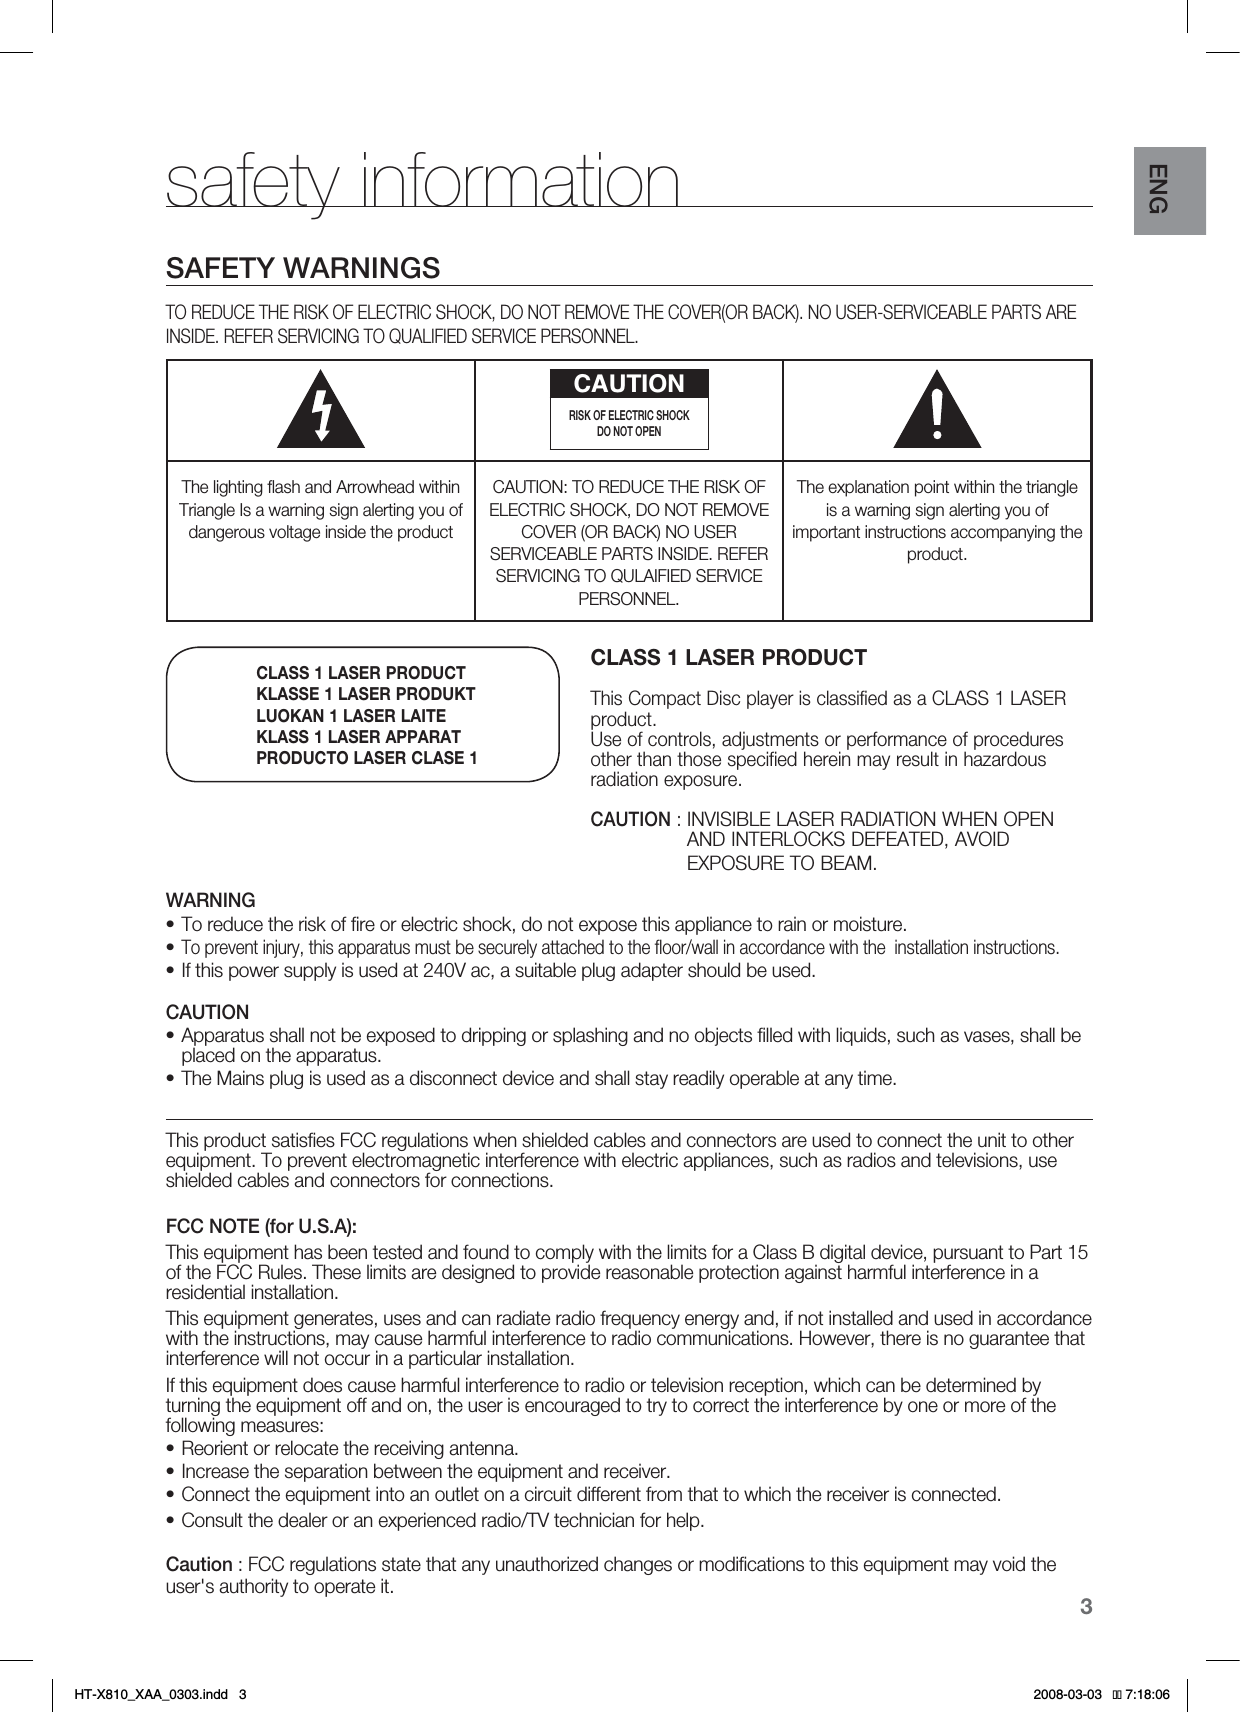 3ENGsafety informationSAFETY WARNINGSTO REDUCE THE RISK OF ELECTRIC SHOCK, DO NOT REMOVE THE COVER(OR BACK). NO USER-SERVICEABLE PARTS ARE INSIDE. REFER SERVICING TO QUALIFIED SERVICE PERSONNEL.CAUTIONRISK OF ELECTRIC SHOCK DO NOT OPENThe lighting ﬂash and Arrowhead within Triangle Is a warning sign alerting you of dangerous voltage inside the productCAUTION: TO REDUCE THE RISK OF ELECTRIC SHOCK, DO NOT REMOVE COVER (OR BACK) NO USER SERVICEABLE PARTS INSIDE. REFER SERVICING TO QULAIFIED SERVICE PERSONNEL.The explanation point within the triangle is a warning sign alerting you of important instructions accompanying the product.WARNINGTo reduce the risk of ﬁre or electric shock, do not expose this appliance to rain or moisture.To prevent injury, this apparatus must be securely attached to the ﬂoor/wall in accordance with the  installation instructions. If this power supply is used at 240V ac, a suitable plug adapter should be used.CAUTIONApparatus shall not be exposed to dripping or splashing and no objects ﬁlled with liquids, such as vases, shall be placed on the apparatus. The Mains plug is used as a disconnect device and shall stay readily operable at any time.This product satisﬁes FCC regulations when shielded cables and connectors are used to connect the unit to other equipment. To prevent electromagnetic interference with electric appliances, such as radios and televisions, use shielded cables and connectors for connections.FCC NOTE (for U.S.A):This equipment has been tested and found to comply with the limits for a Class B digital device, pursuant to Part 15 of the FCC Rules. These limits are designed to provide reasonable protection against harmful interference in a residential installation.This equipment generates, uses and can radiate radio frequency energy and, if not installed and used in accordance with the instructions, may cause harmful interference to radio communications. However, there is no guarantee that interference will not occur in a particular installation.If this equipment does cause harmful interference to radio or television reception, which can be determined by turning the equipment off and on, the user is encouraged to try to correct the interference by one or more of the following measures:Reorient or relocate the receiving antenna.Increase the separation between the equipment and receiver.Connect the equipment into an outlet on a circuit different from that to which the receiver is connected.Consult the dealer or an experienced radio/TV technician for help.Caution : FCC regulations state that any unauthorized changes or modiﬁcations to this equipment may void the user&apos;s authority to operate it.•••••••••CLASS 1 LASER PRODUCTThis Compact Disc player is classified as a CLASS 1 LASER product.Use of controls, adjustments or performance of procedures other than those specified herein may result in hazardous radiation exposure.CAUTION :INVISIBLE LASER RADIATION WHEN OPEN AND INTERLOCKS DEFEATED, AVOID EXPOSURE TO BEAM.CLASS 1 LASER PRODUCTKLASSE 1 LASER PRODUKTLUOKAN 1 LASER LAITEKLASS 1 LASER APPARATPRODUCTO LASER CLASE 1HT-X810_XAA_0303.indd   3 